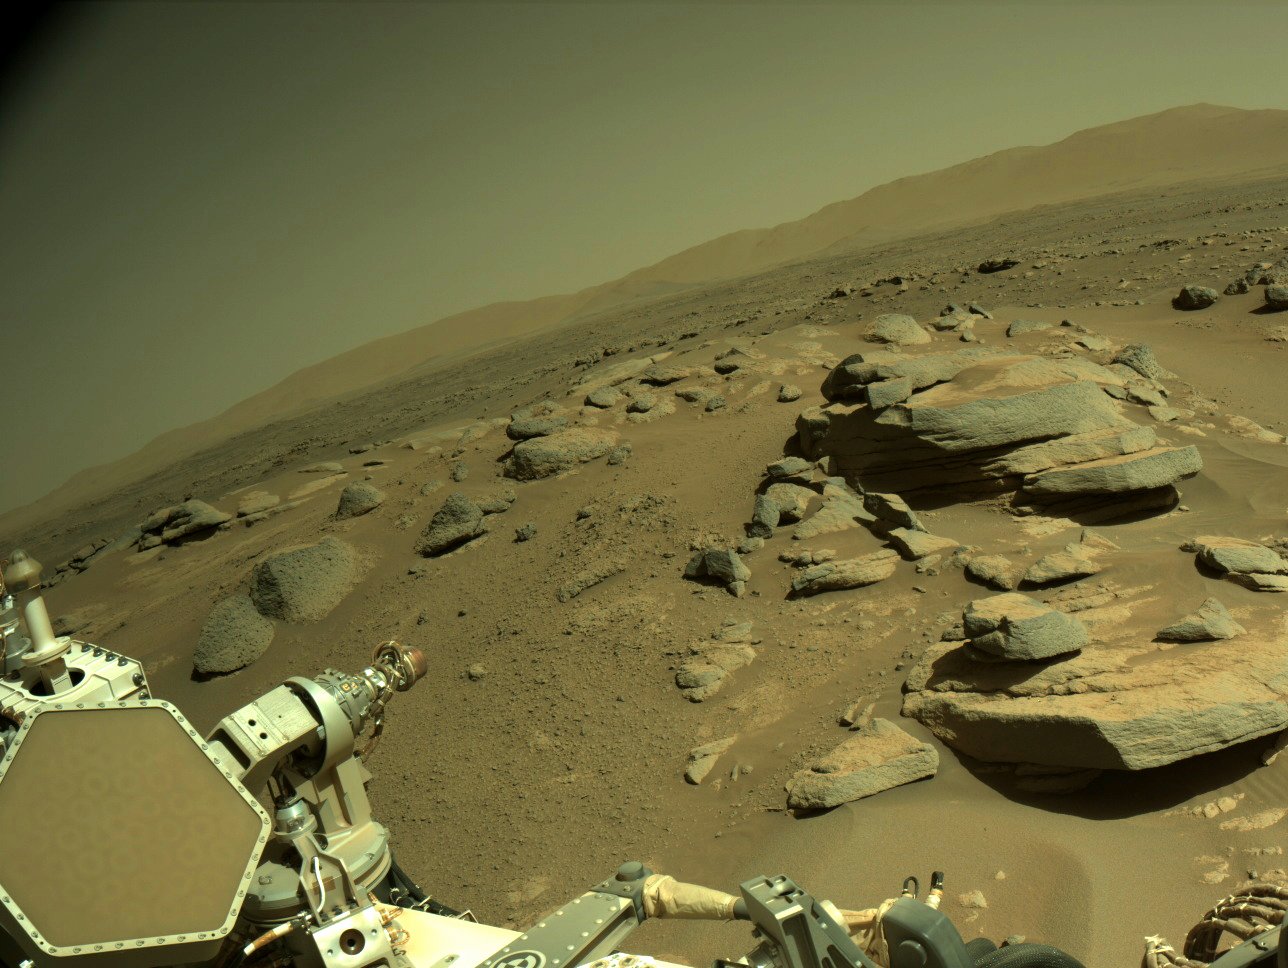 Photo Taken by the Perseverance Rover